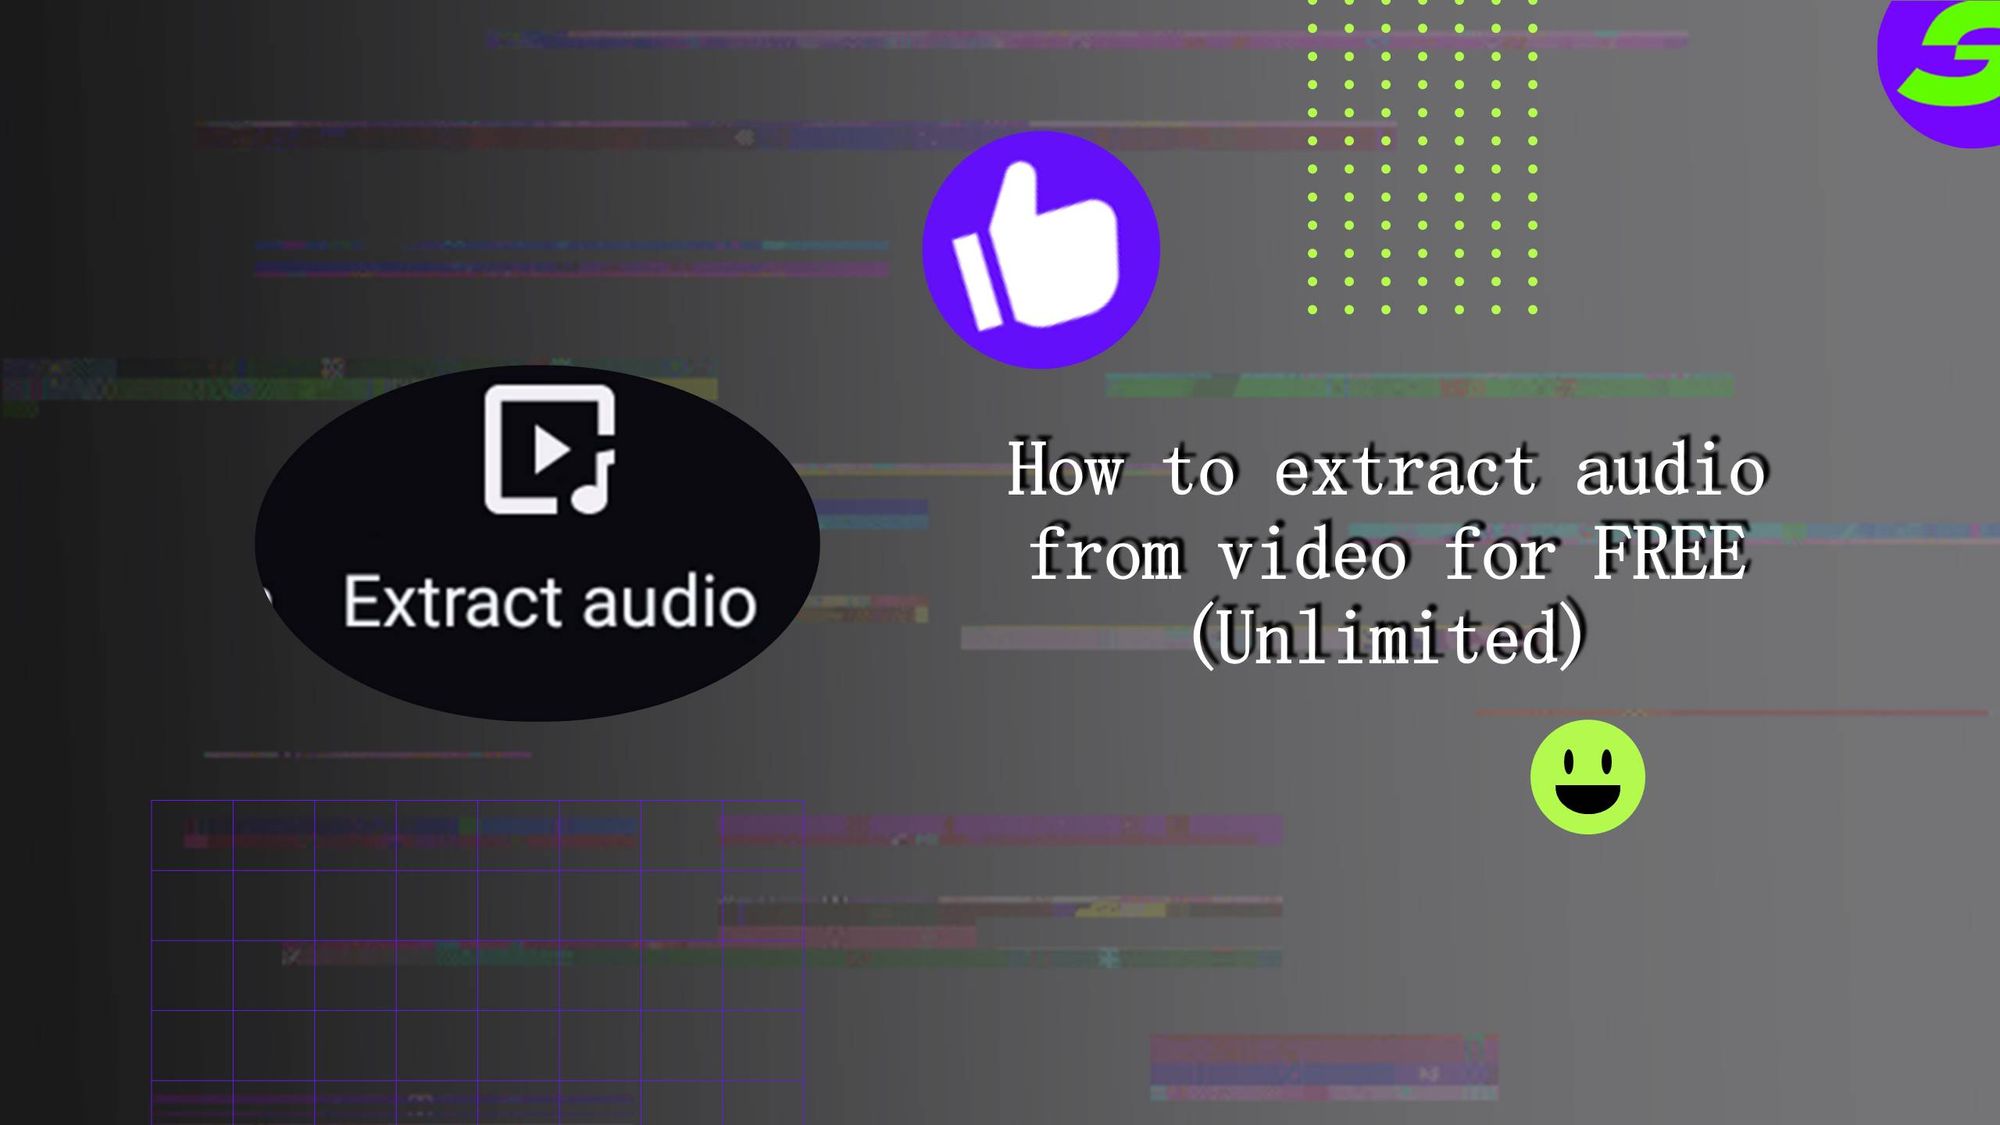 How to Extract Audio with ShotCut free video editor